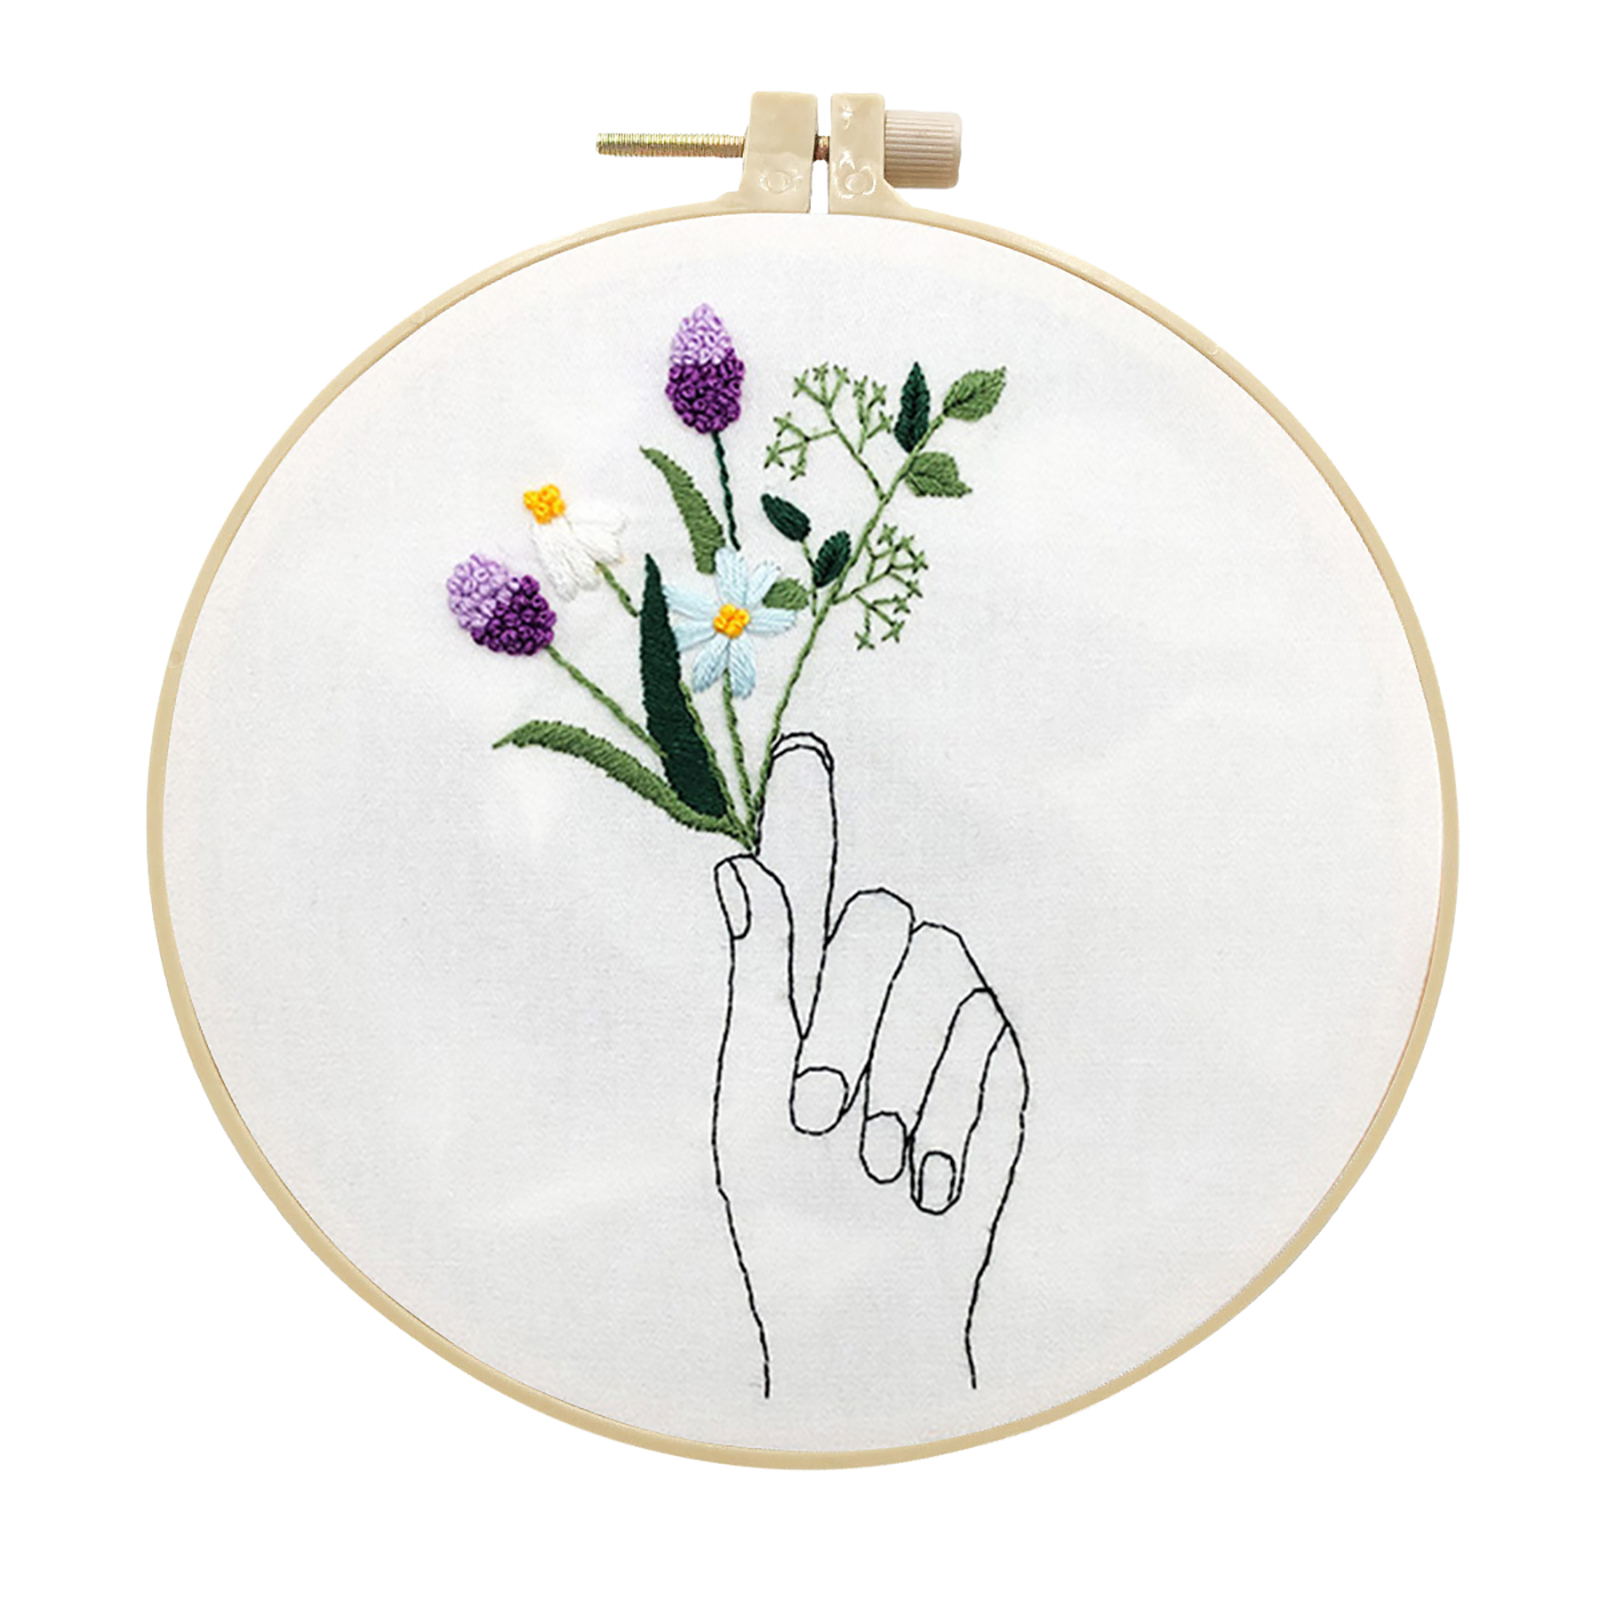 Handmade Embroidery Kit Cross stitch kit for Adult Beginner - Wildflowers in hand Pattern